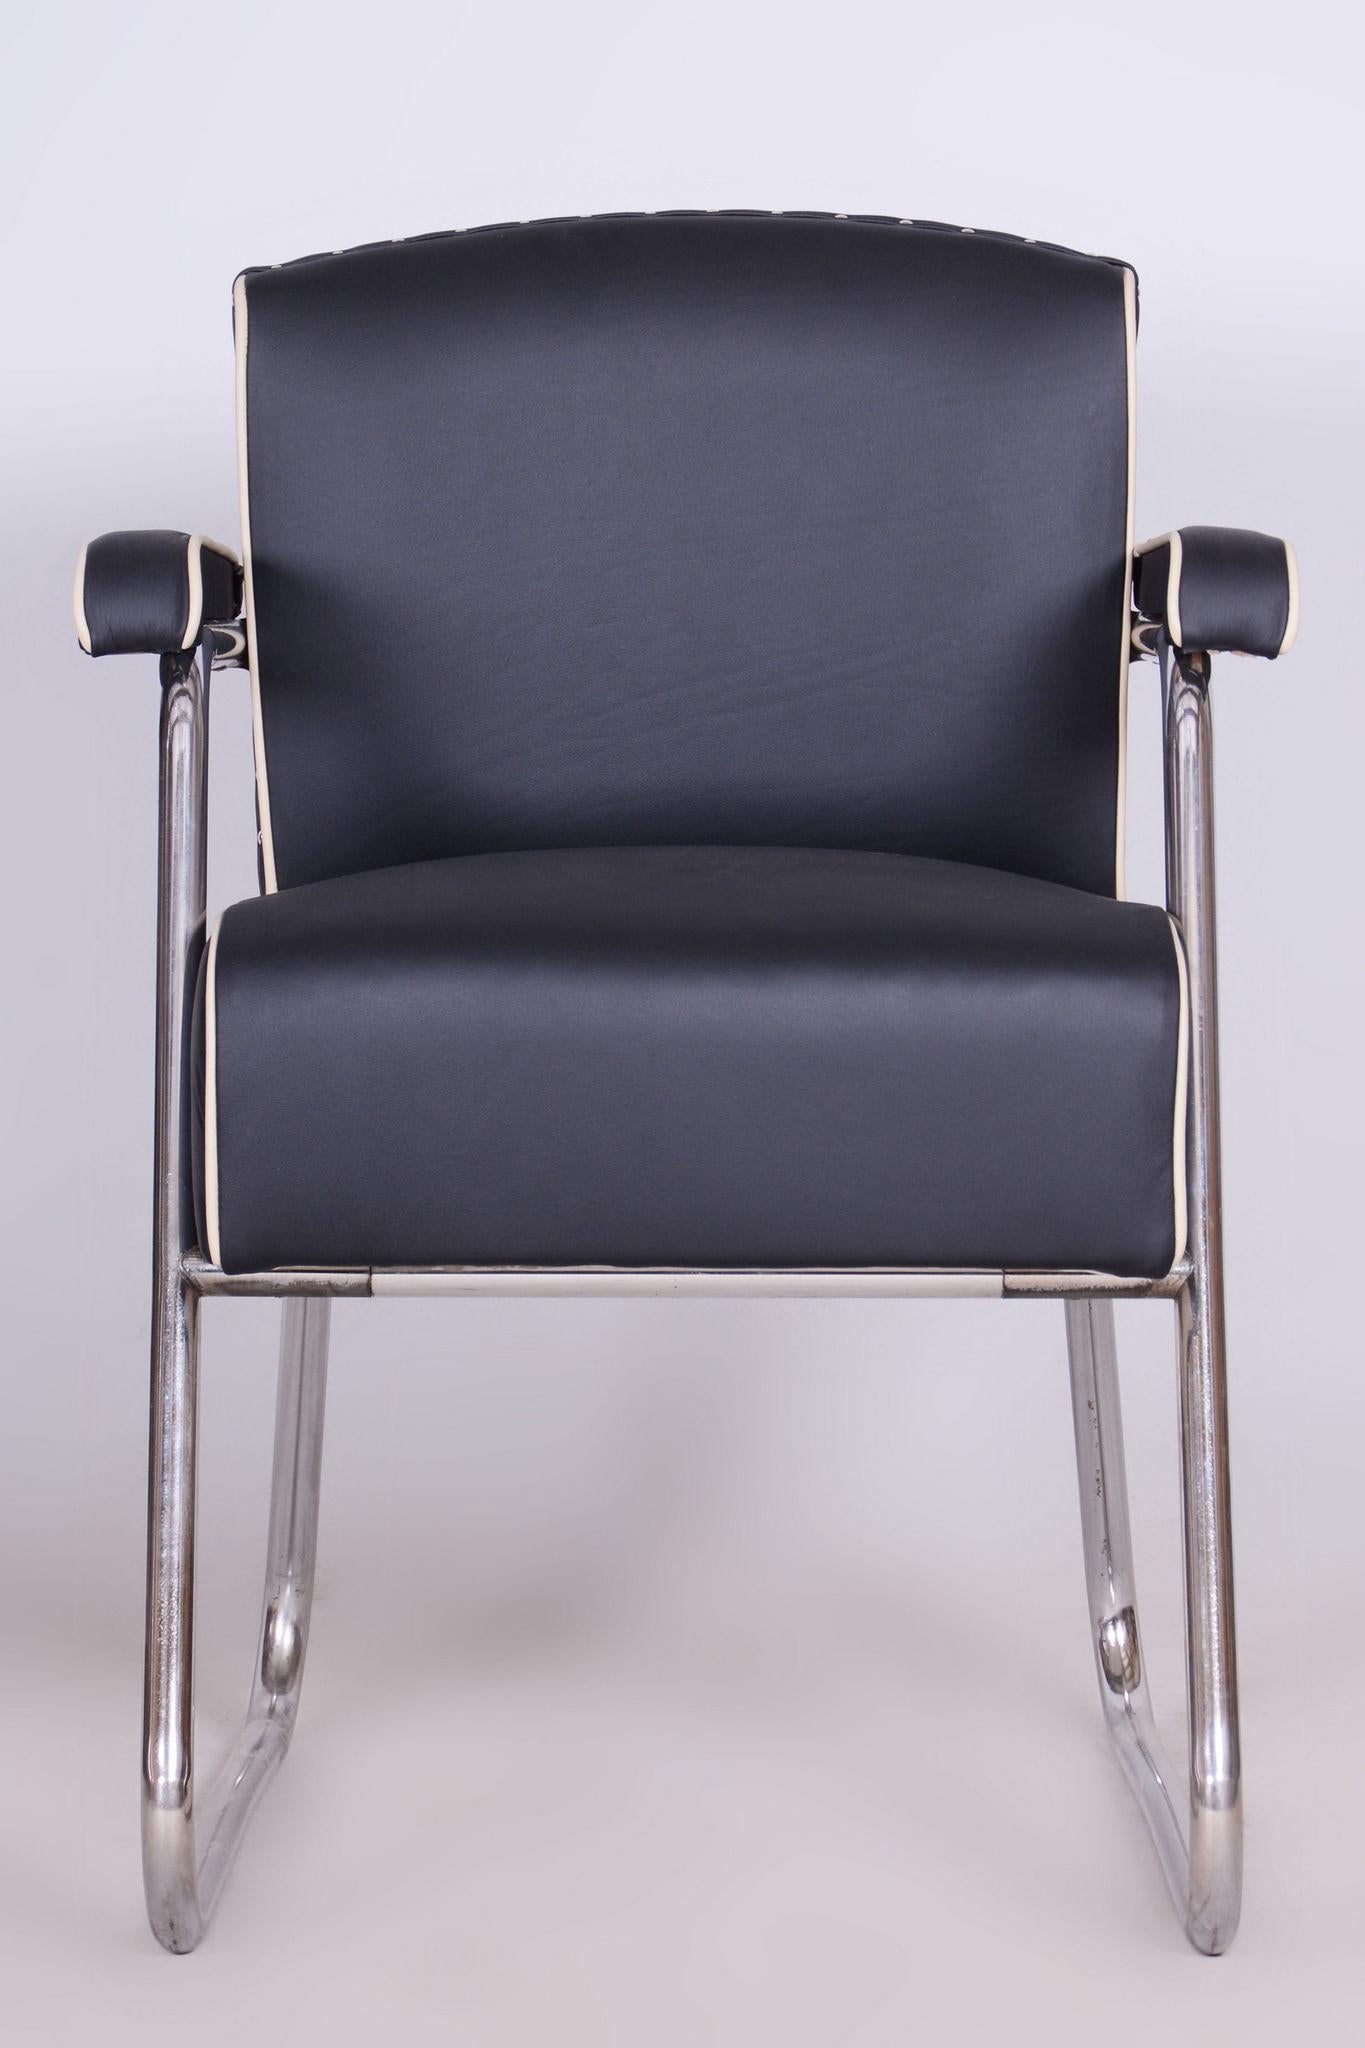 Restored Black Bauhaus Armchair, Mauser, Rohde, Chrome, Leather, Germany, 1930s For Sale 2